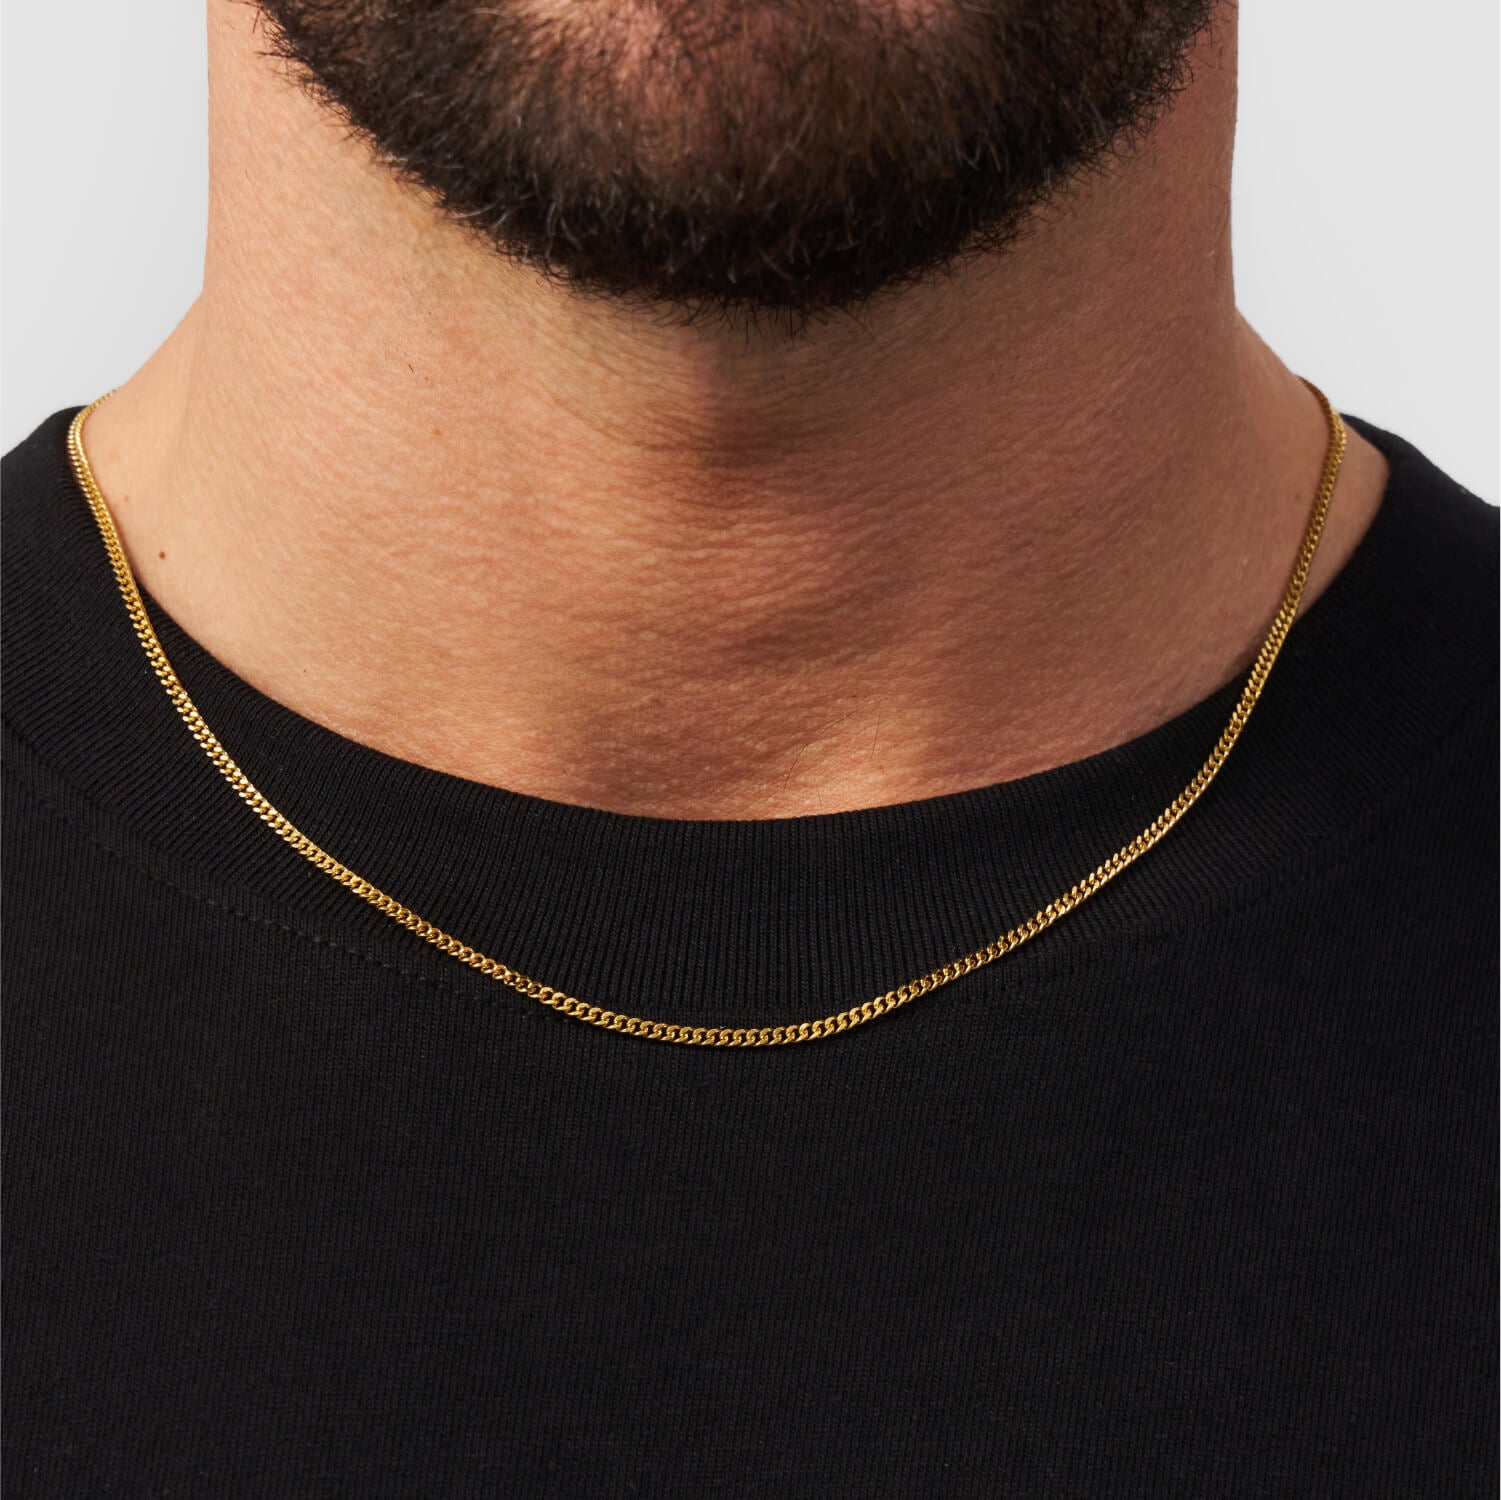 Connell Chain (Gold) 2mm